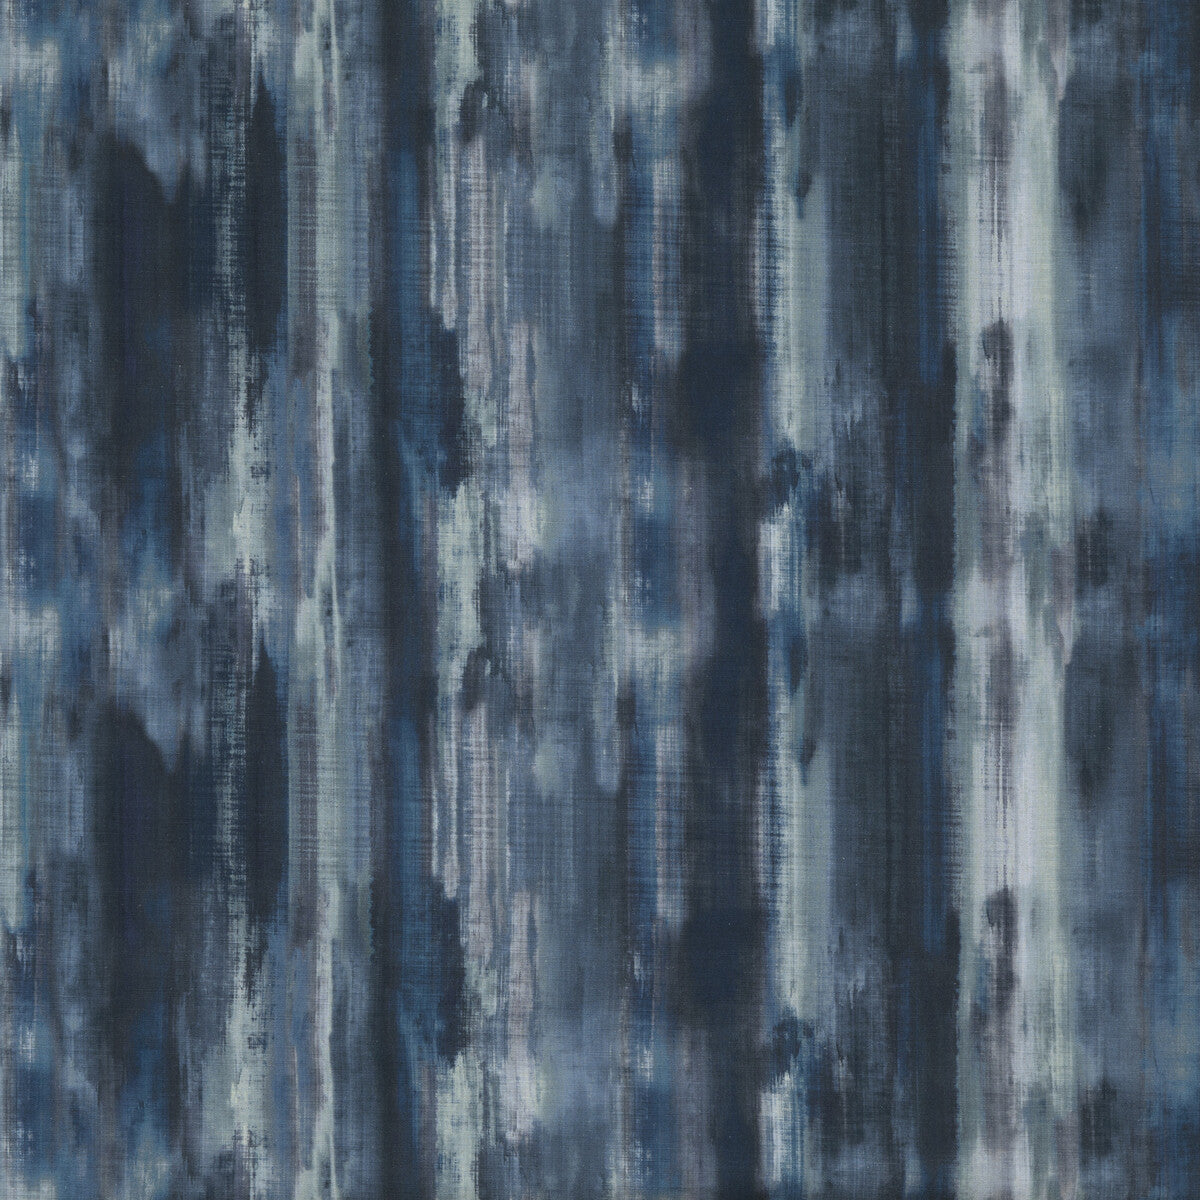 Fallingwater fabric in indigo color - pattern ED75033.1.0 - by Threads in the Moro collection